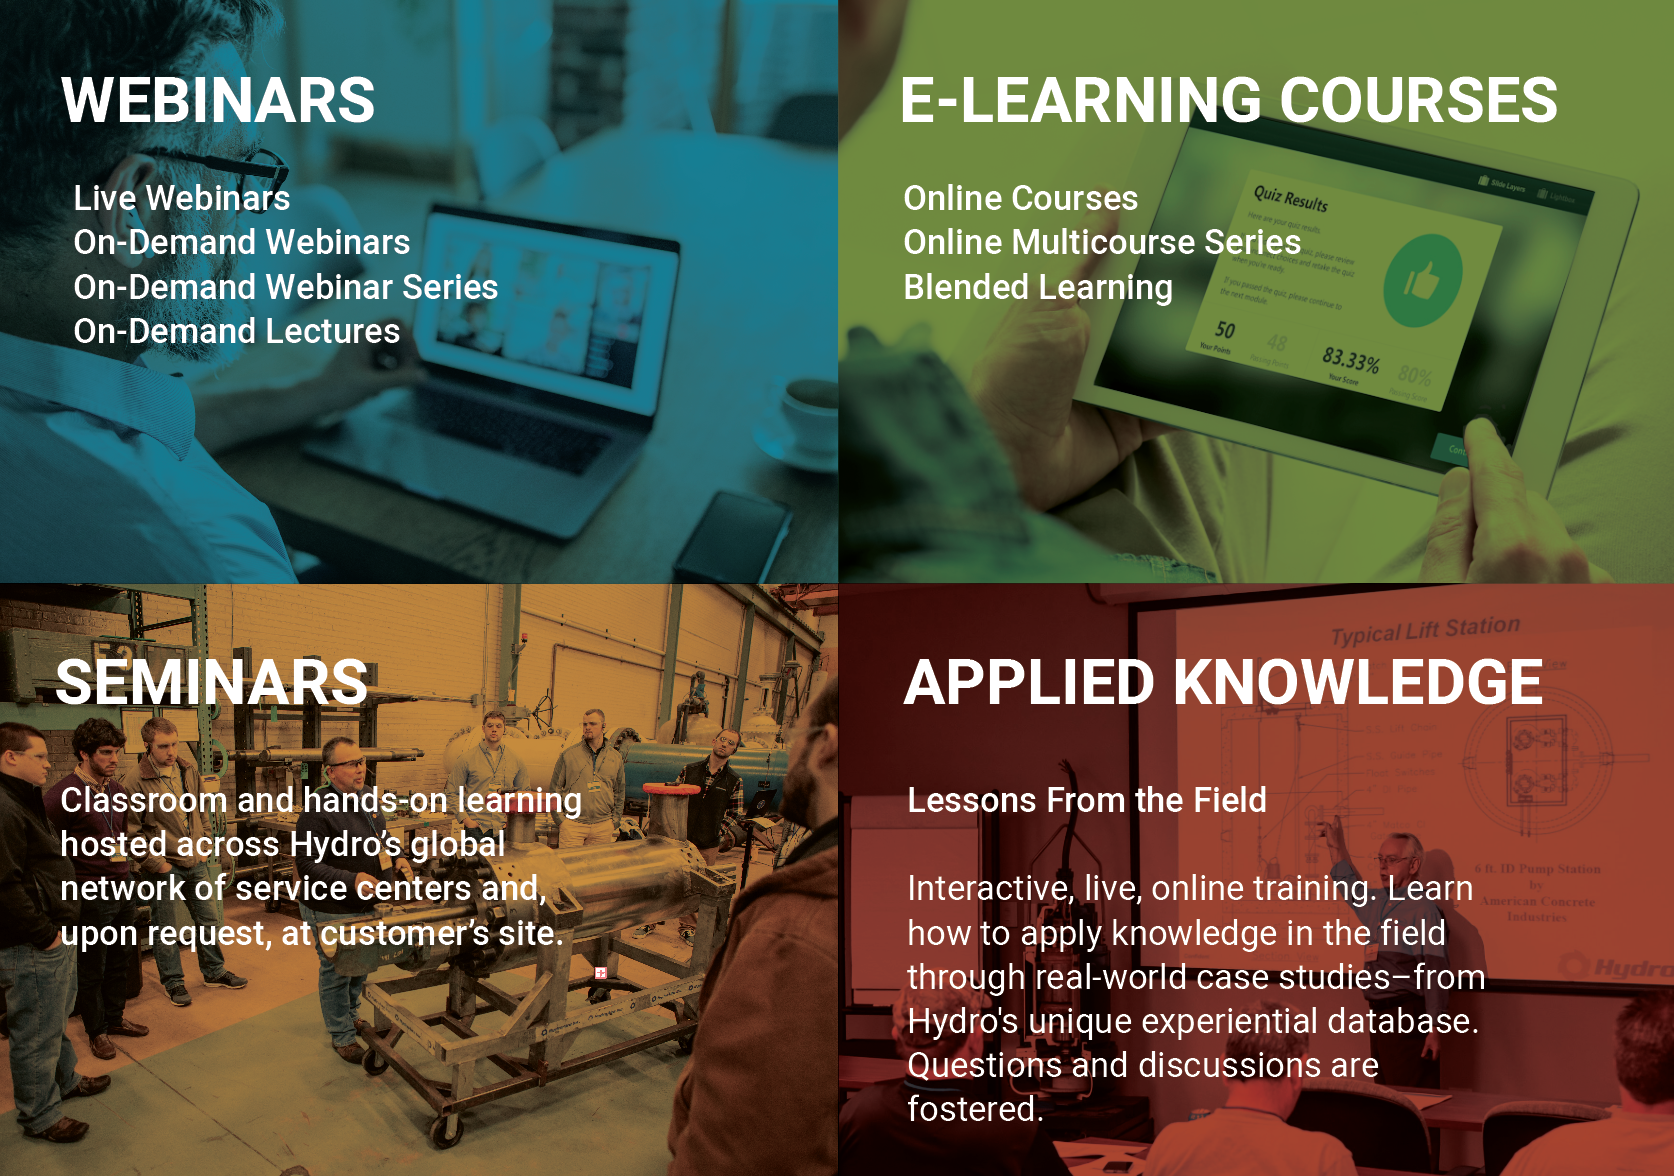 Hydro University will offer webinars, e-learning courses, seminars, and applied knowledge.